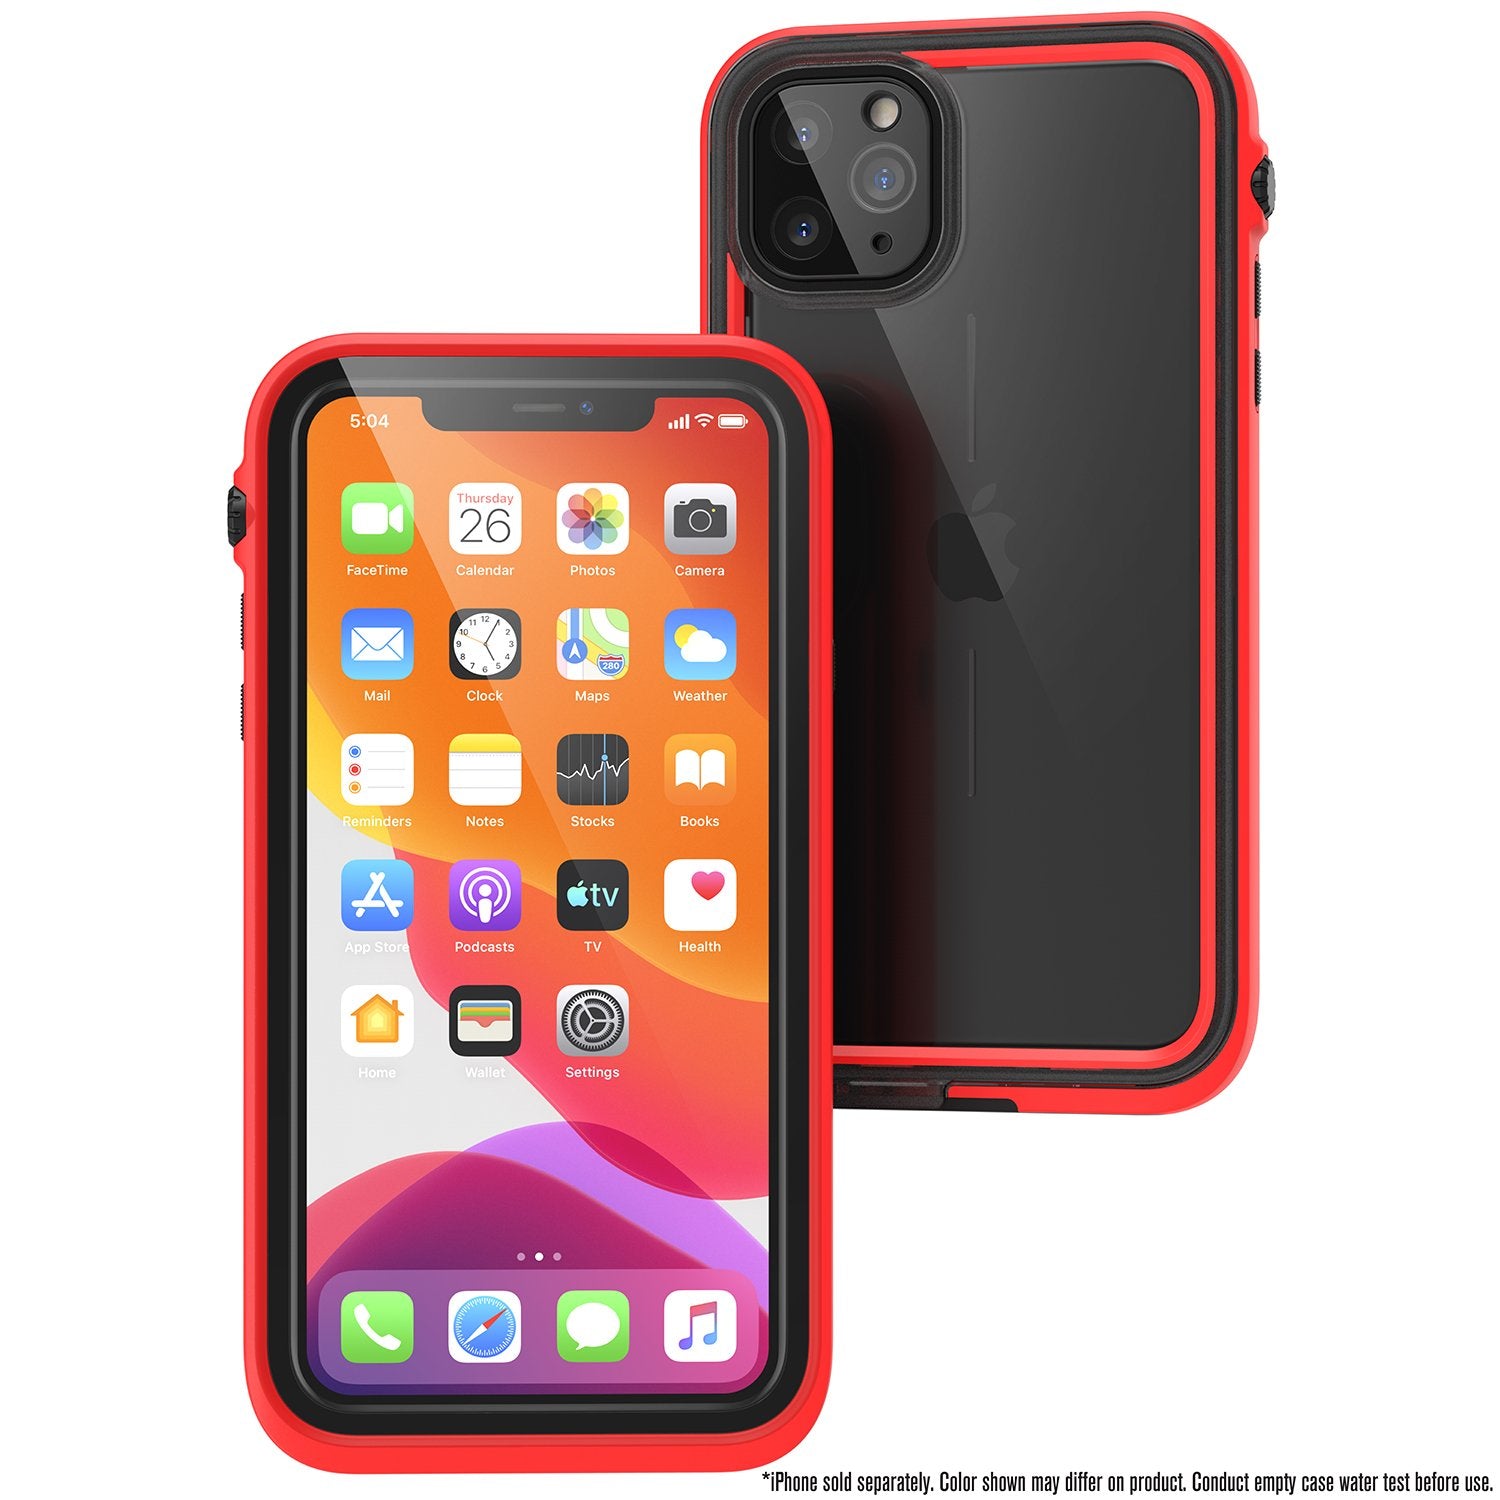 Catalyst iphone 11 pro max waterproof case showing the front and back view of the case in flame-red colorway